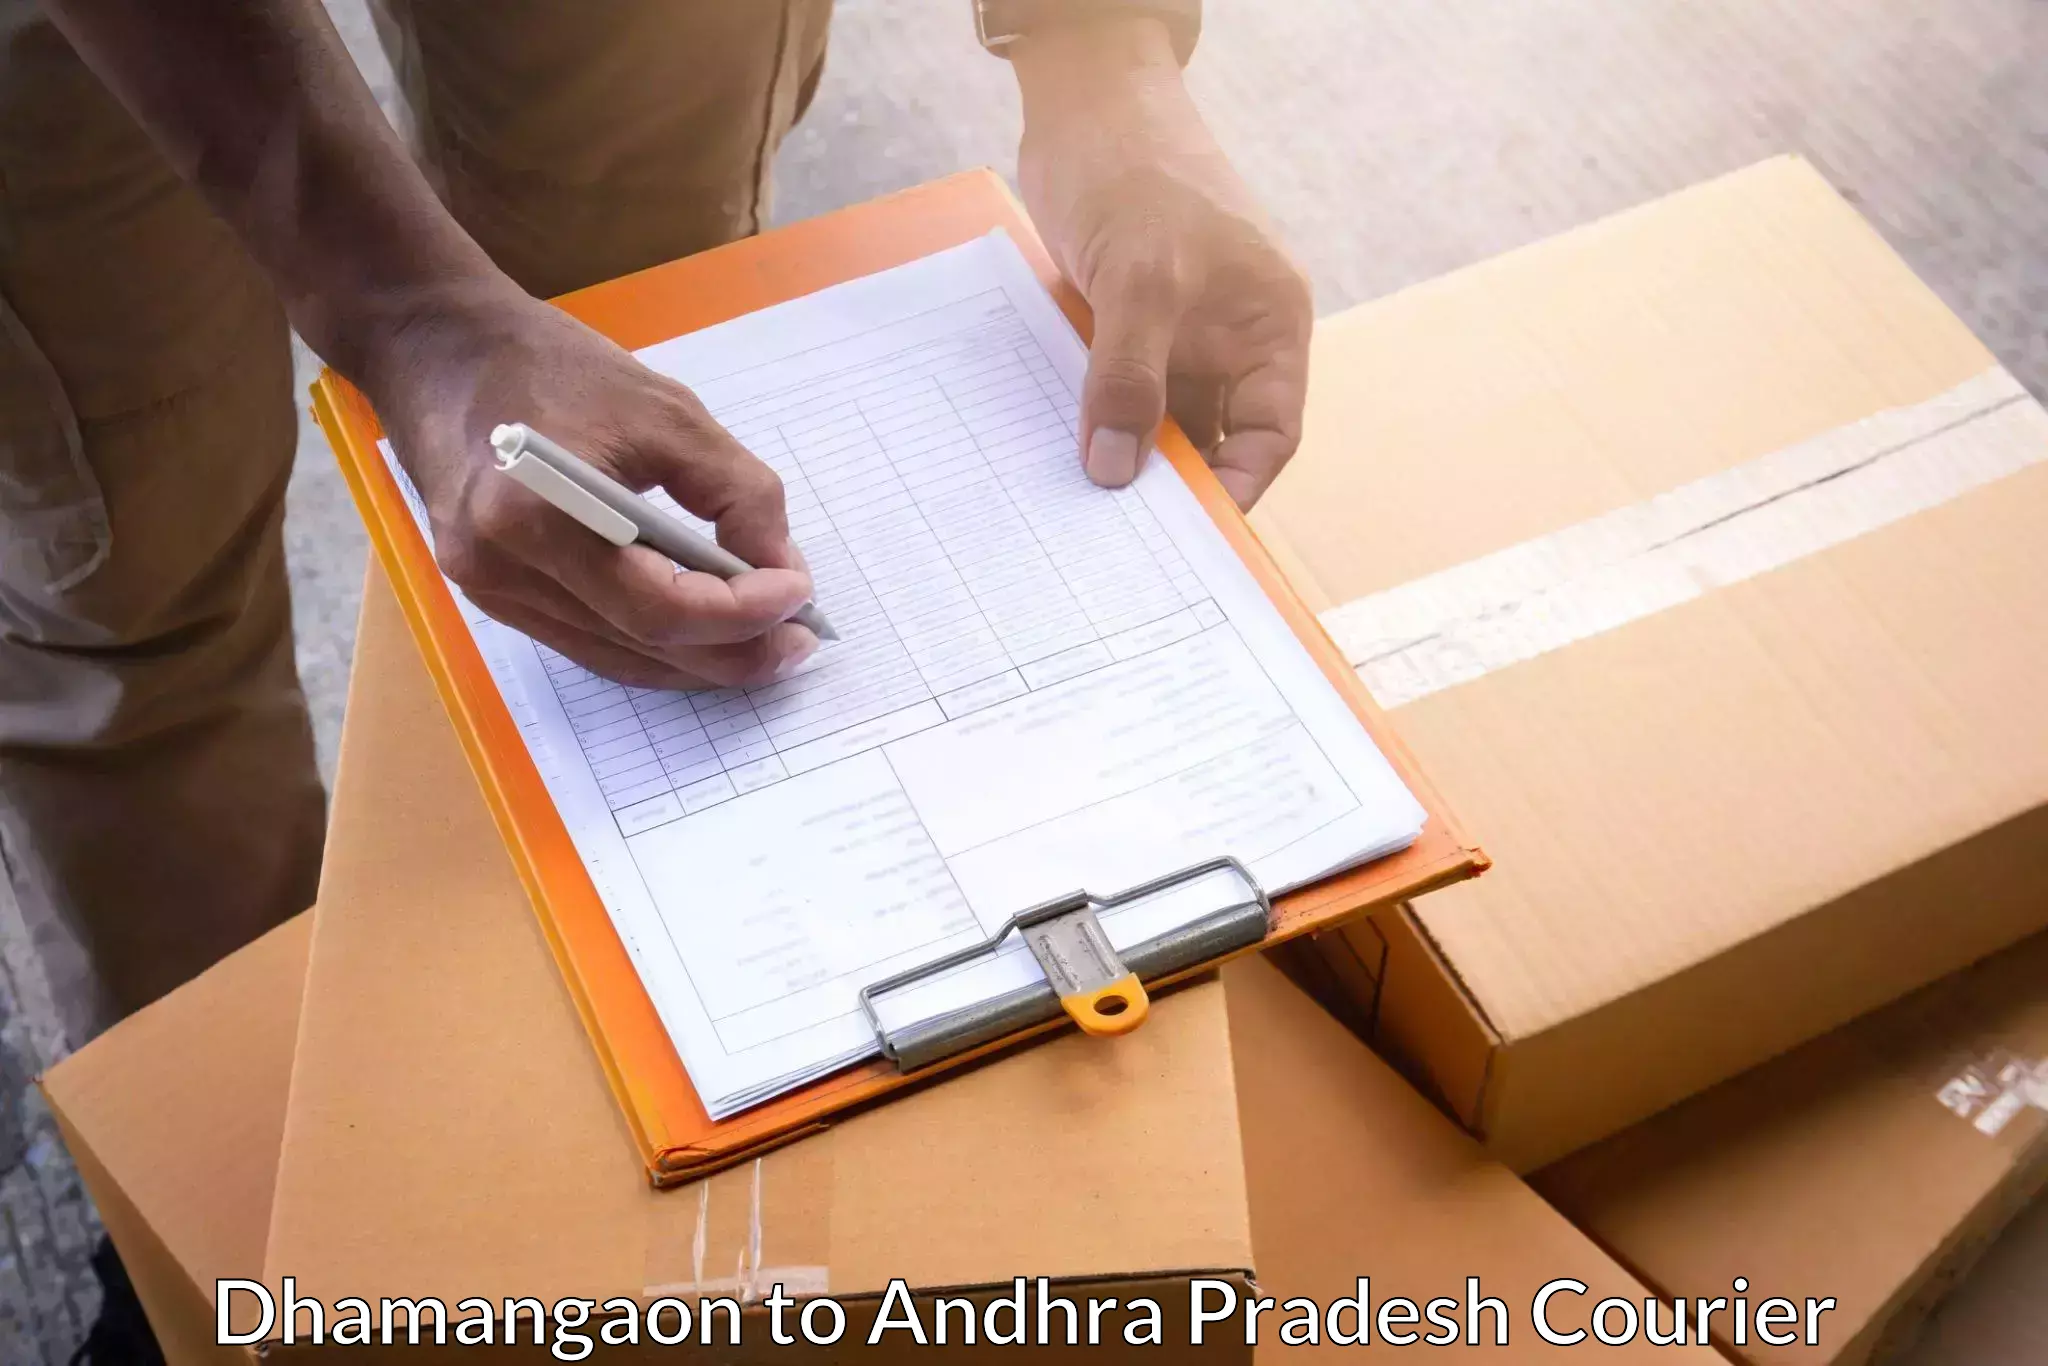 Courier service efficiency in Dhamangaon to Andhra Pradesh